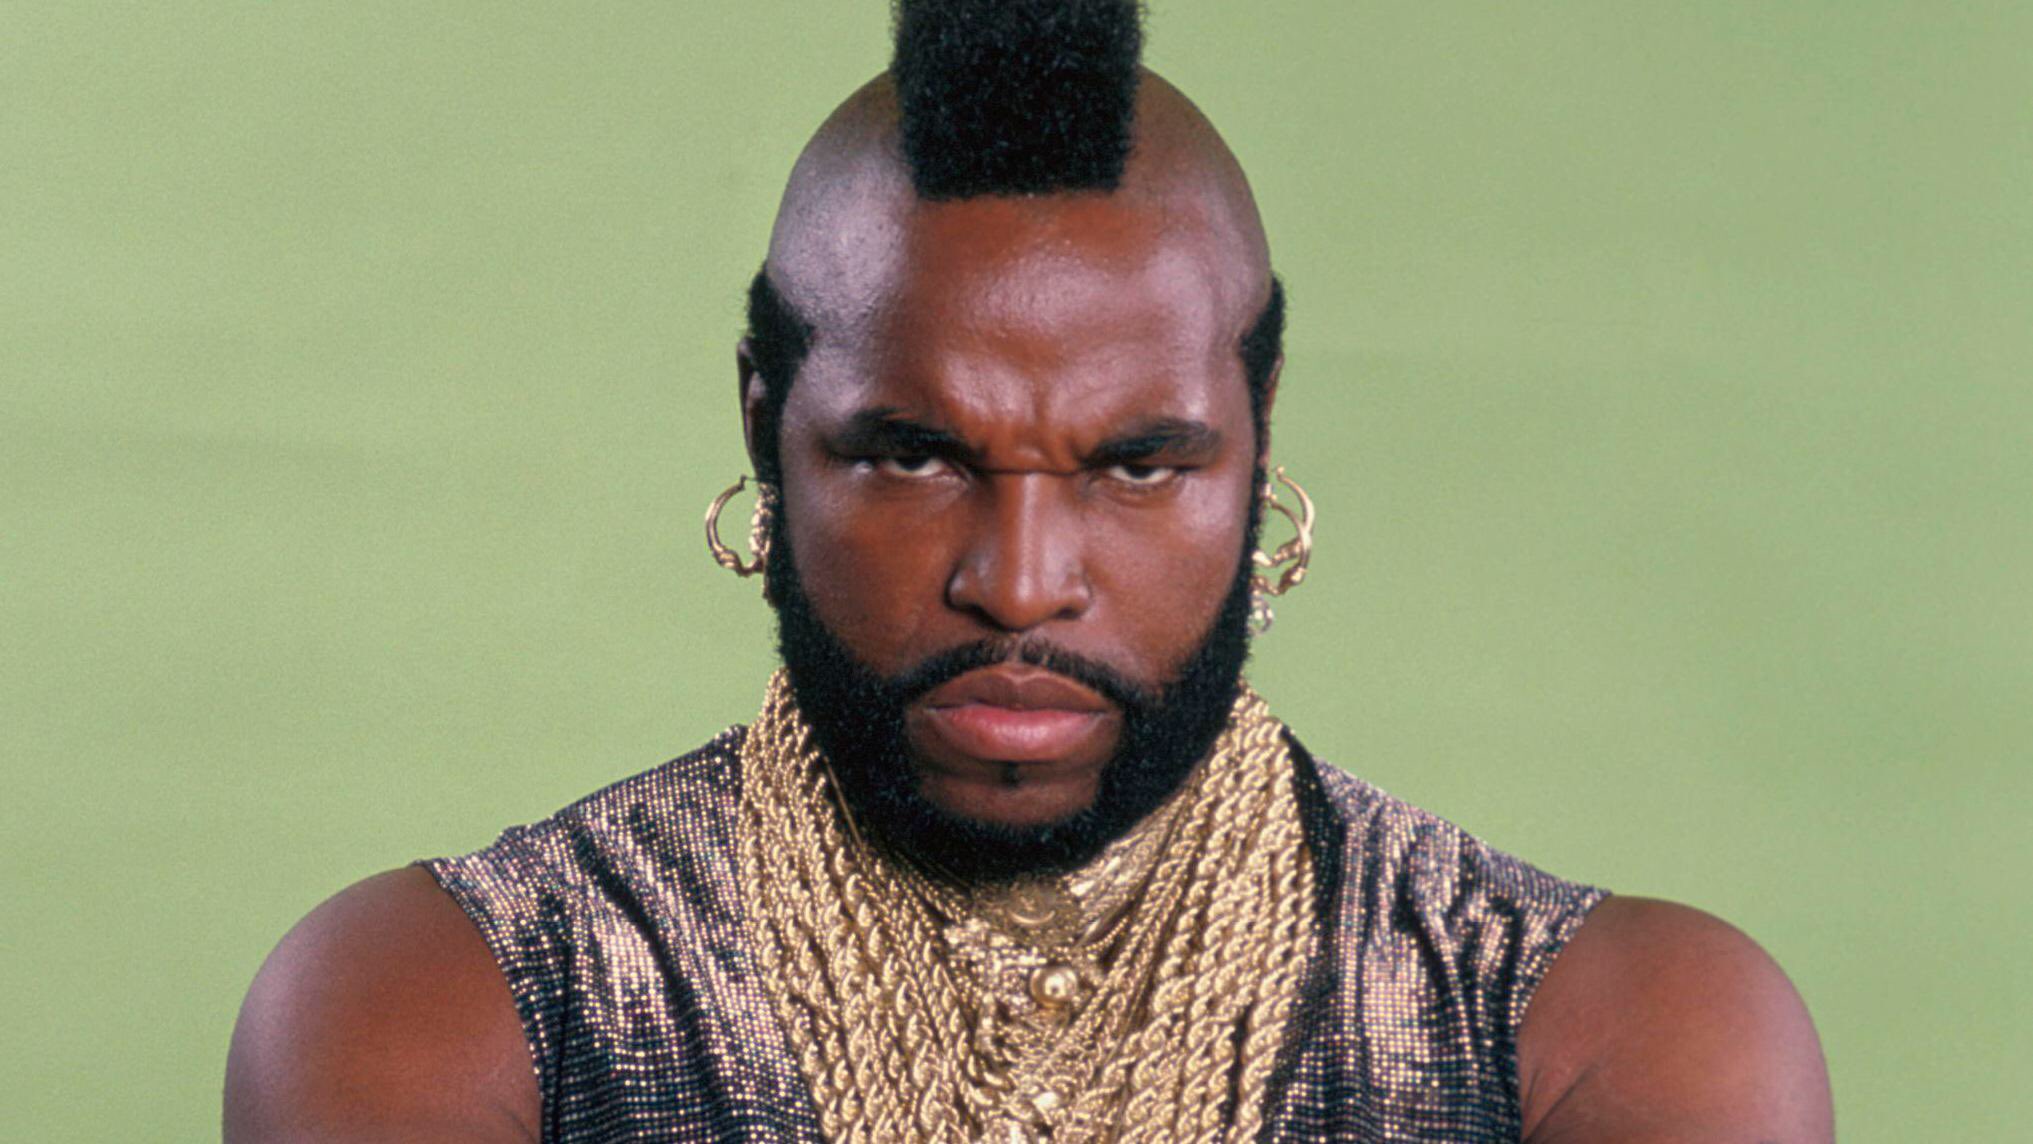 Happy Birthday to Mr T born May 21, 1952 - 65 years old     